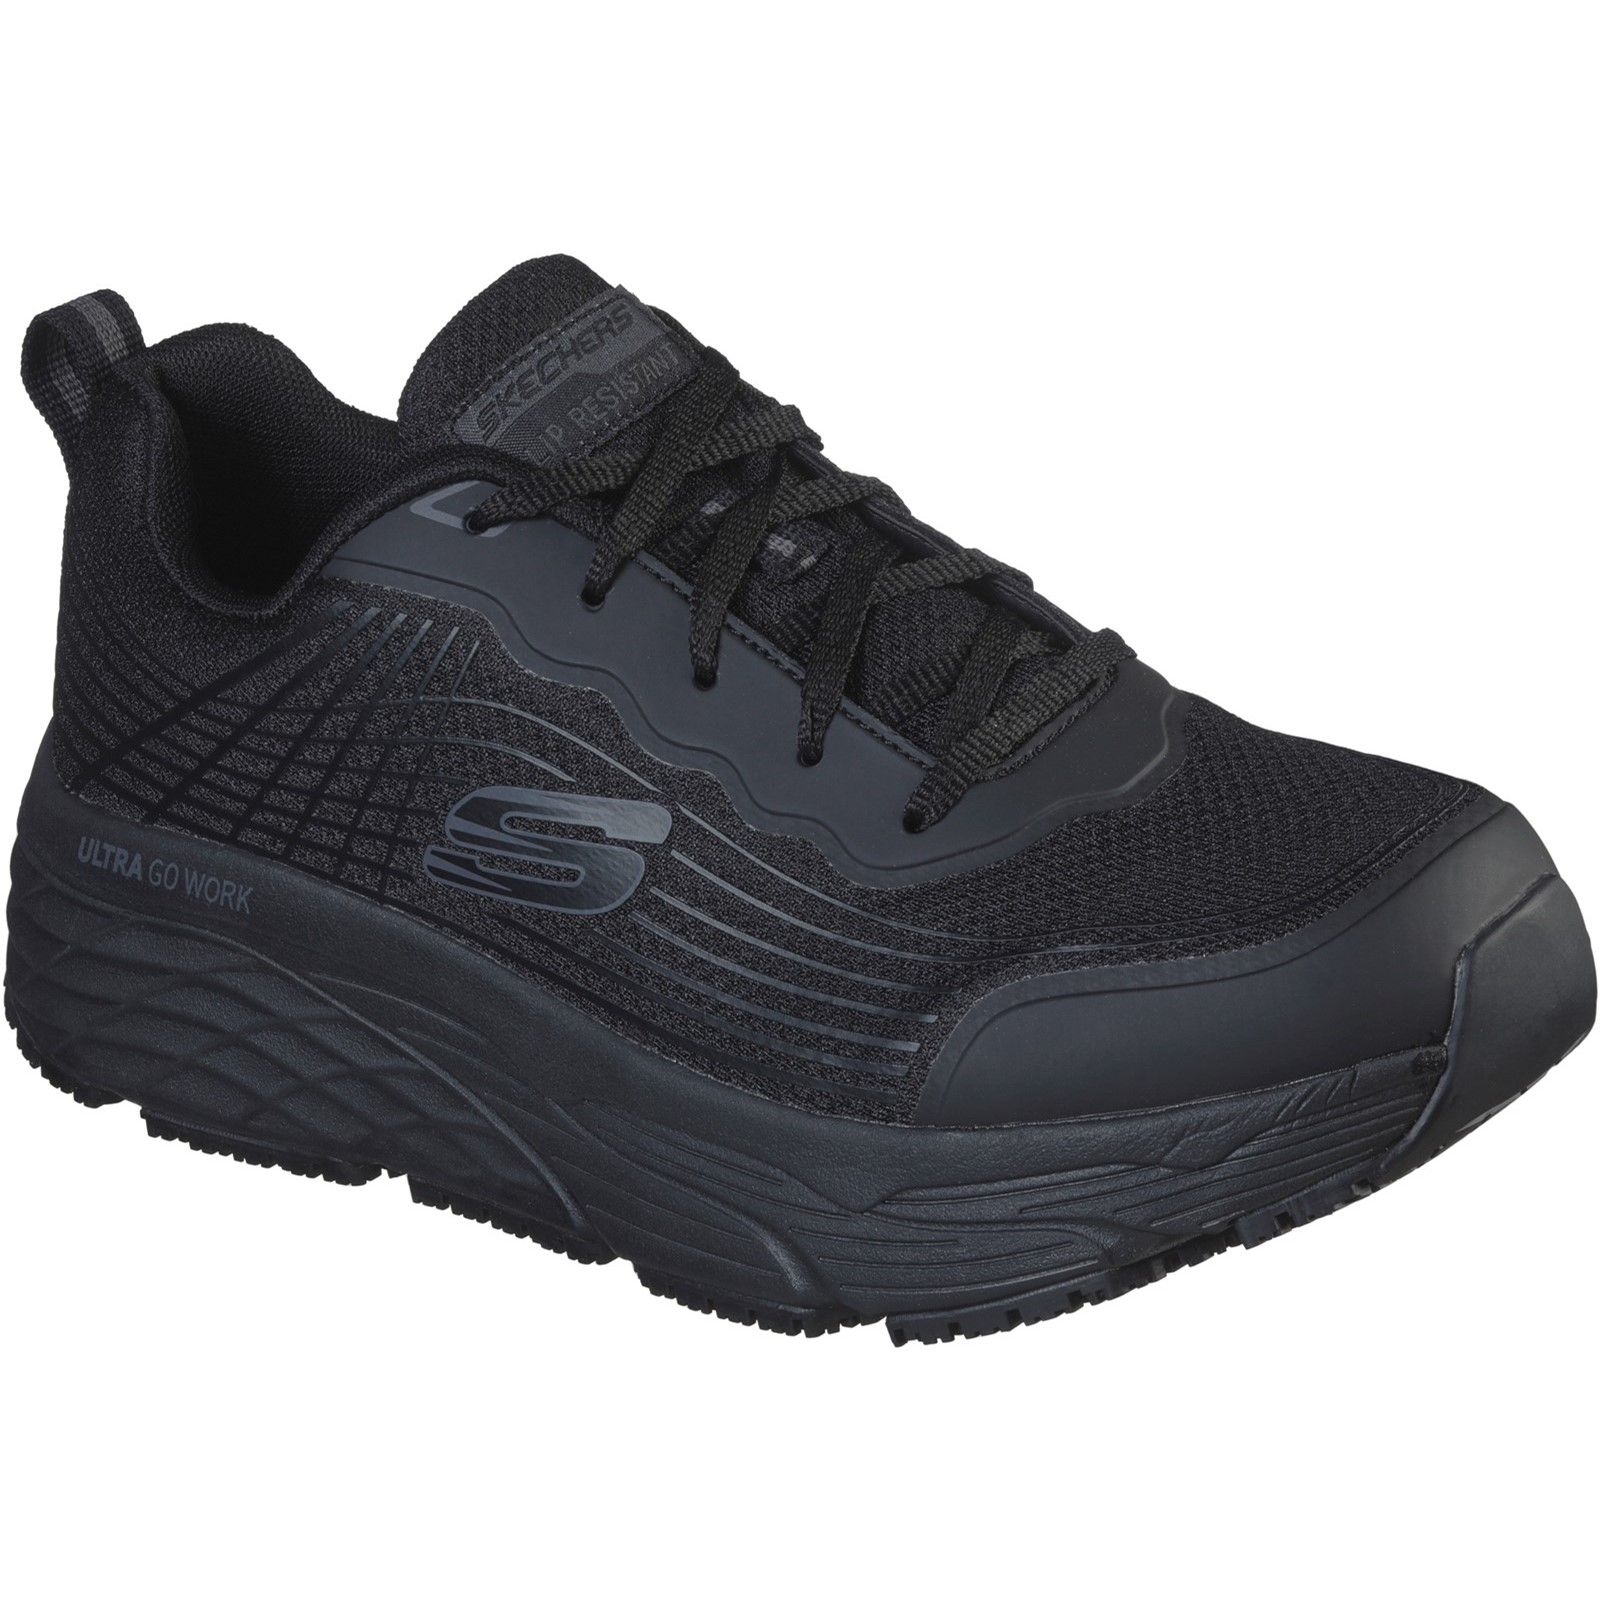 Skechers Work Relaxed Fit Max Cushioning Elite Trainer